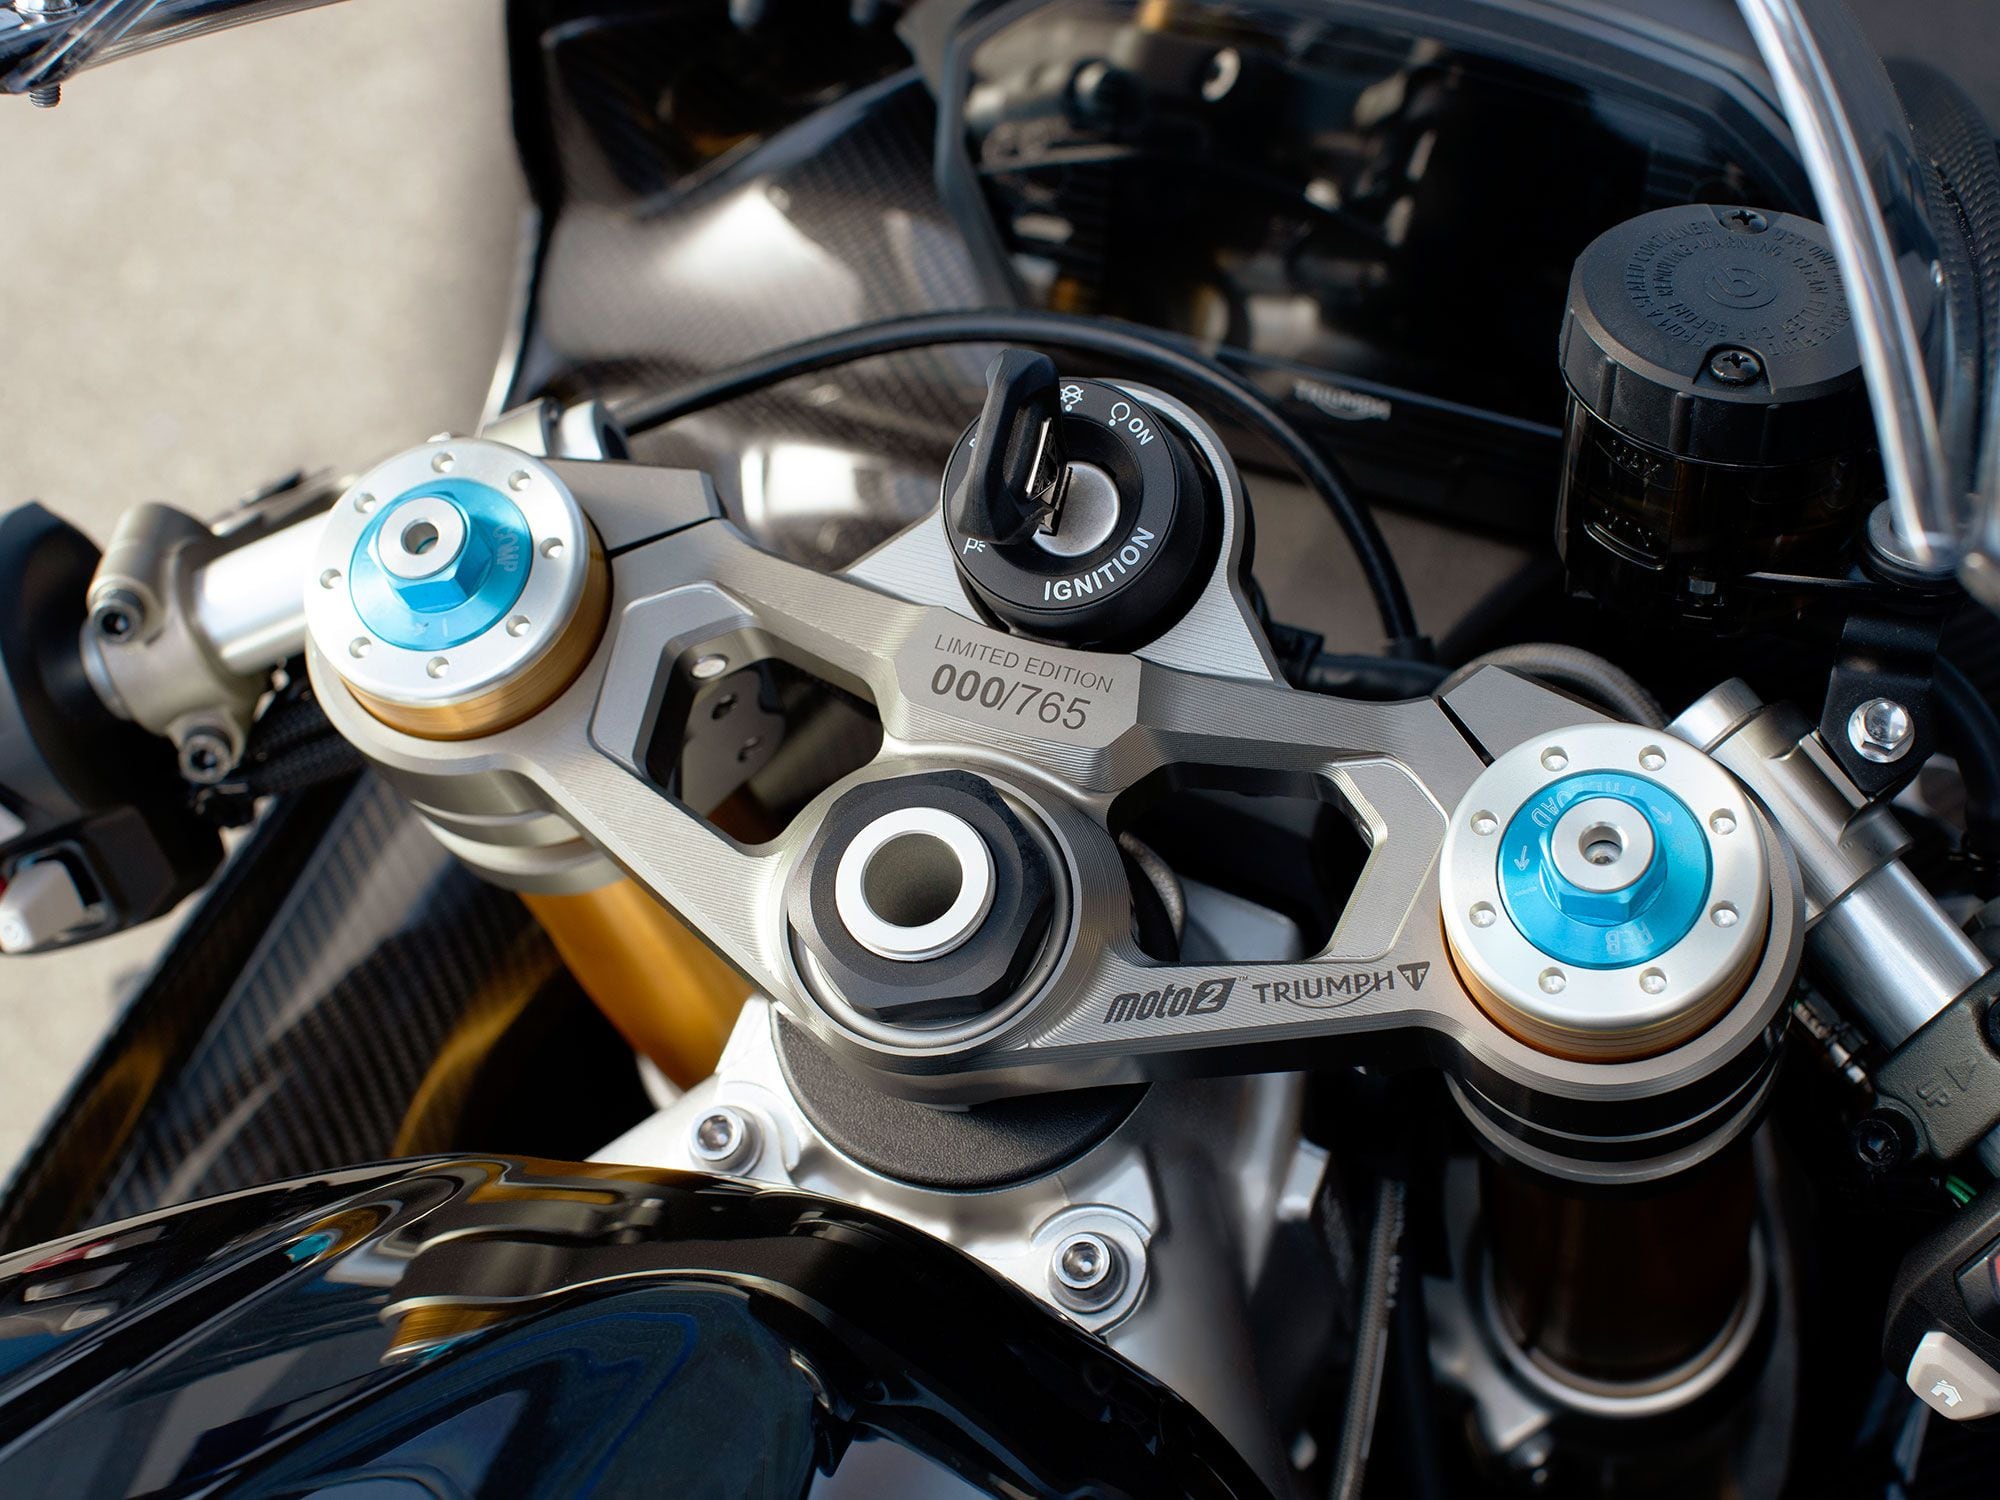 Each Moto2 replica is adorned with its production number atop the triple clamp. A total of 1,530 vehicles are being manufactured worldwide.